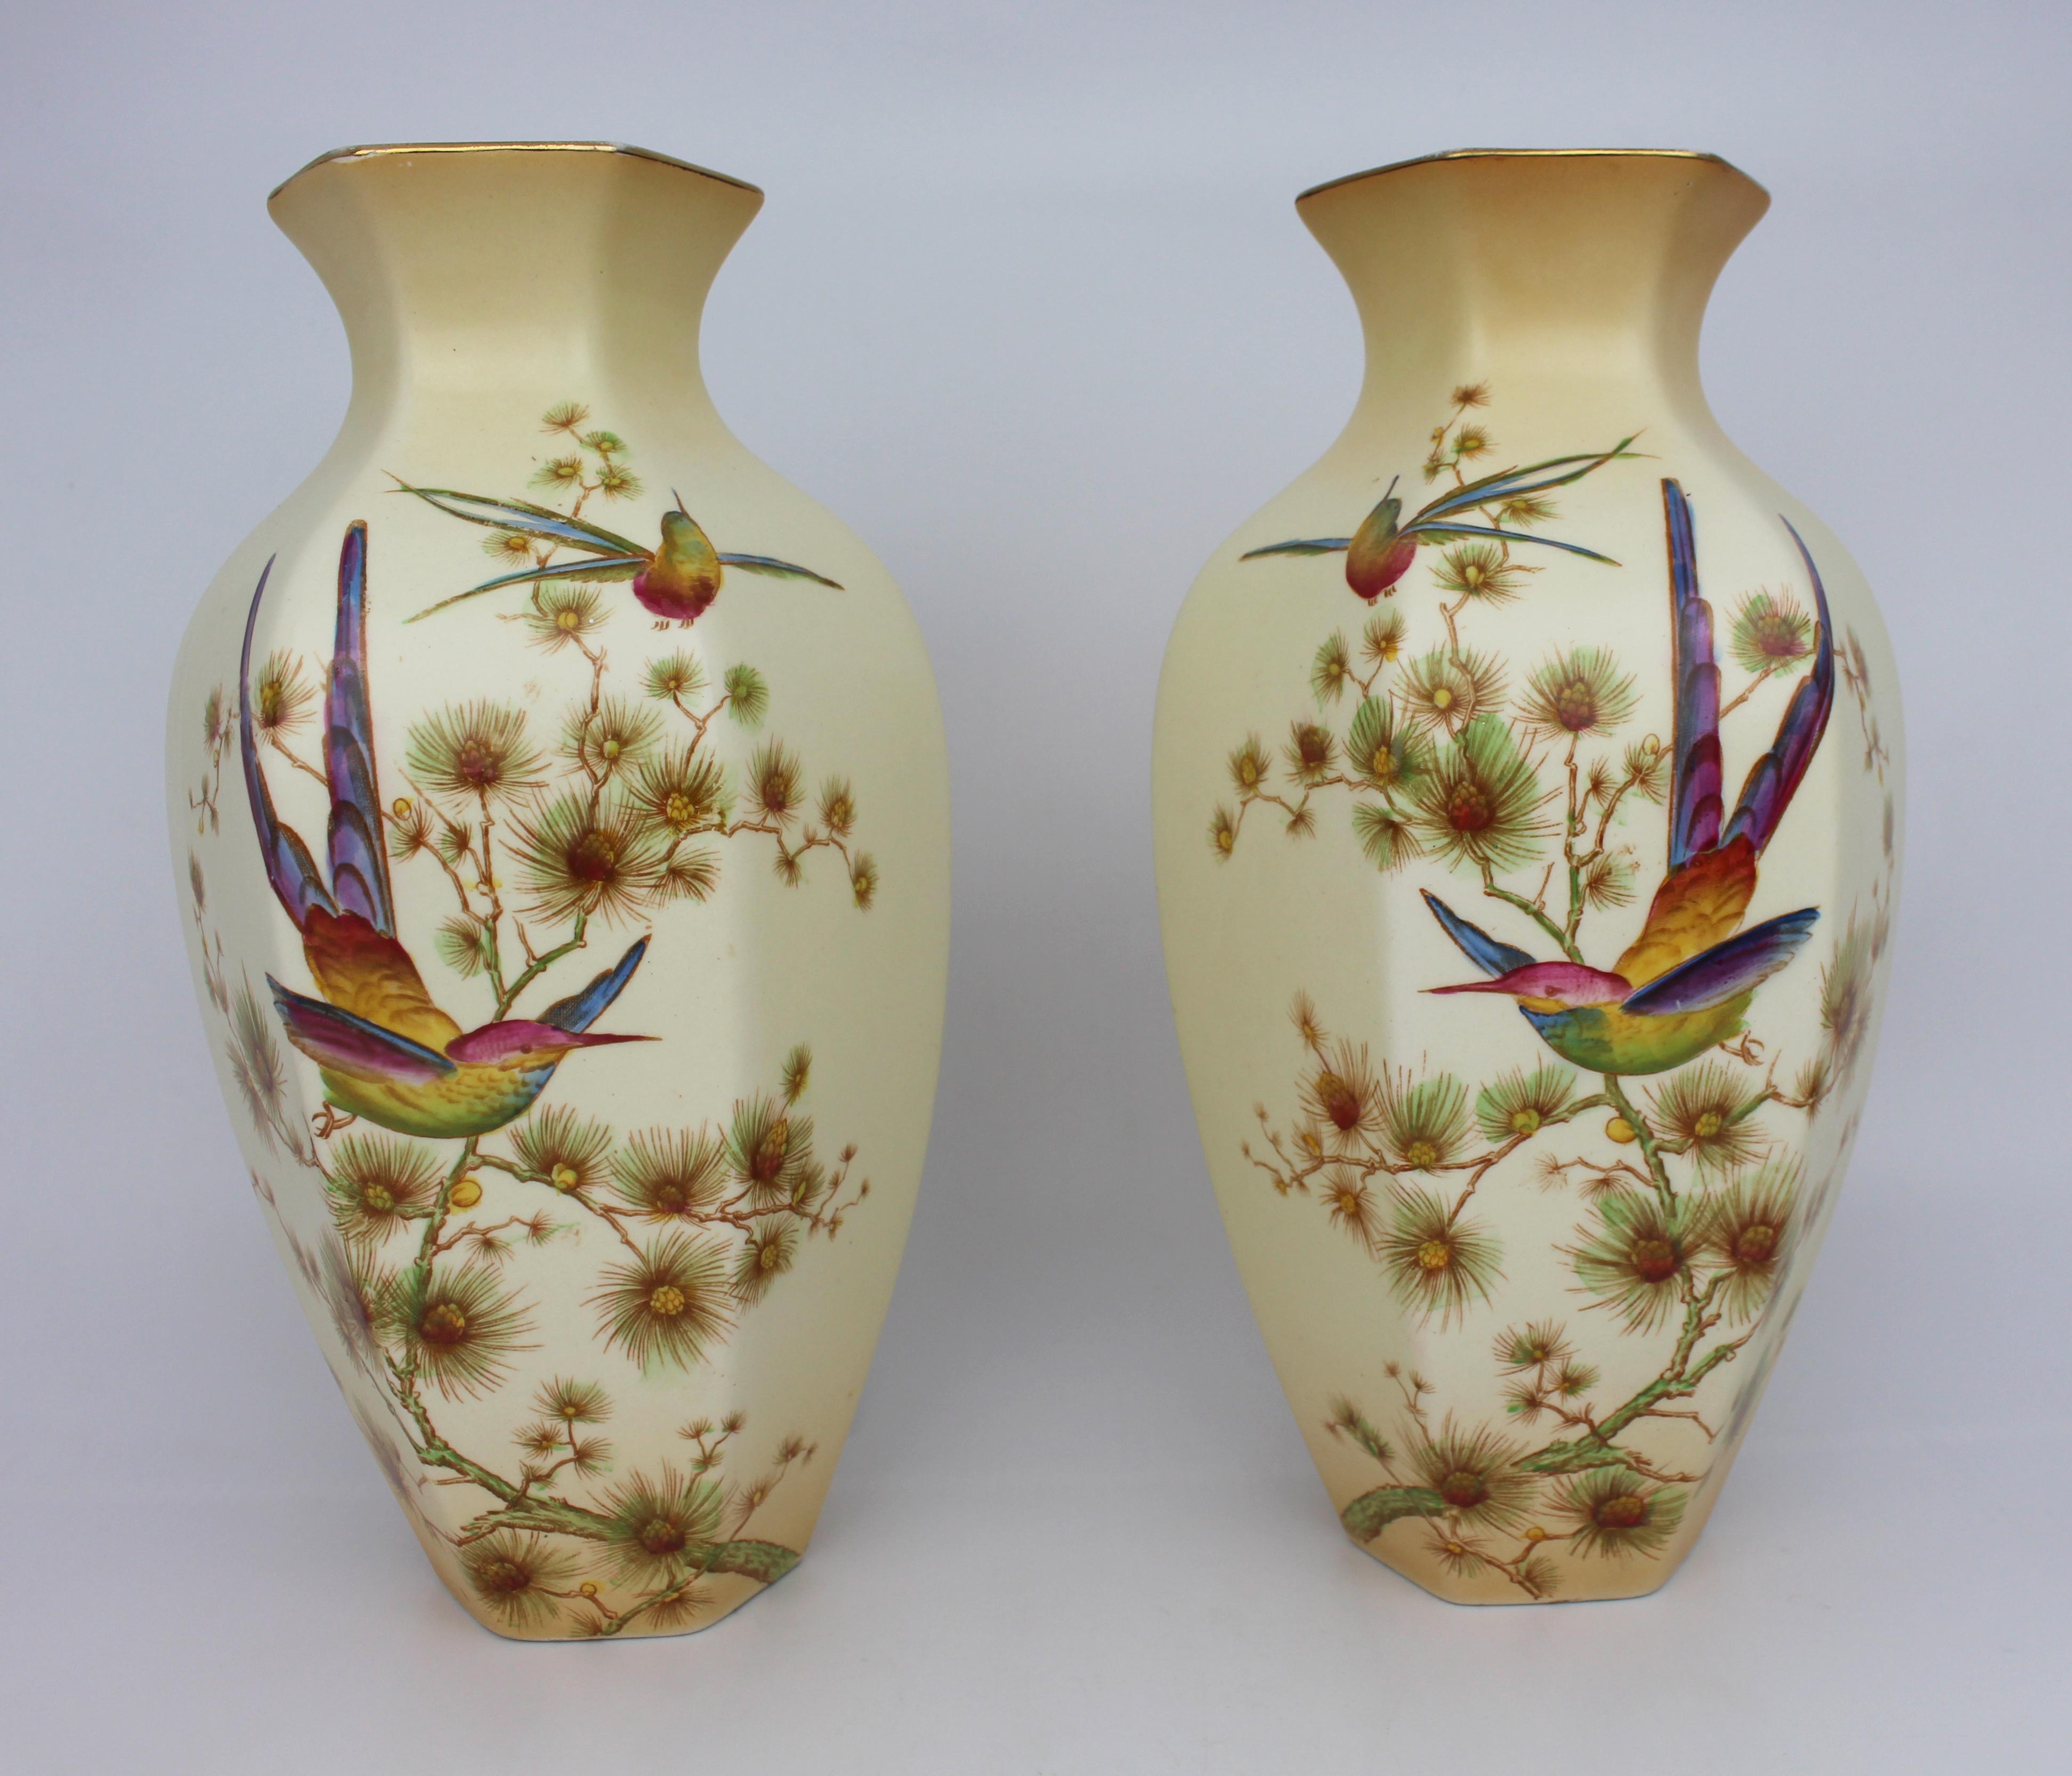 Pair of Edwardian crown Ducal ware vases



Early 20th century, English.


Hexagonal form baluster vase


Blush ivory ground with finely painted decoration; a songbird to one side and a butterfly to the reverse.


A true matched and